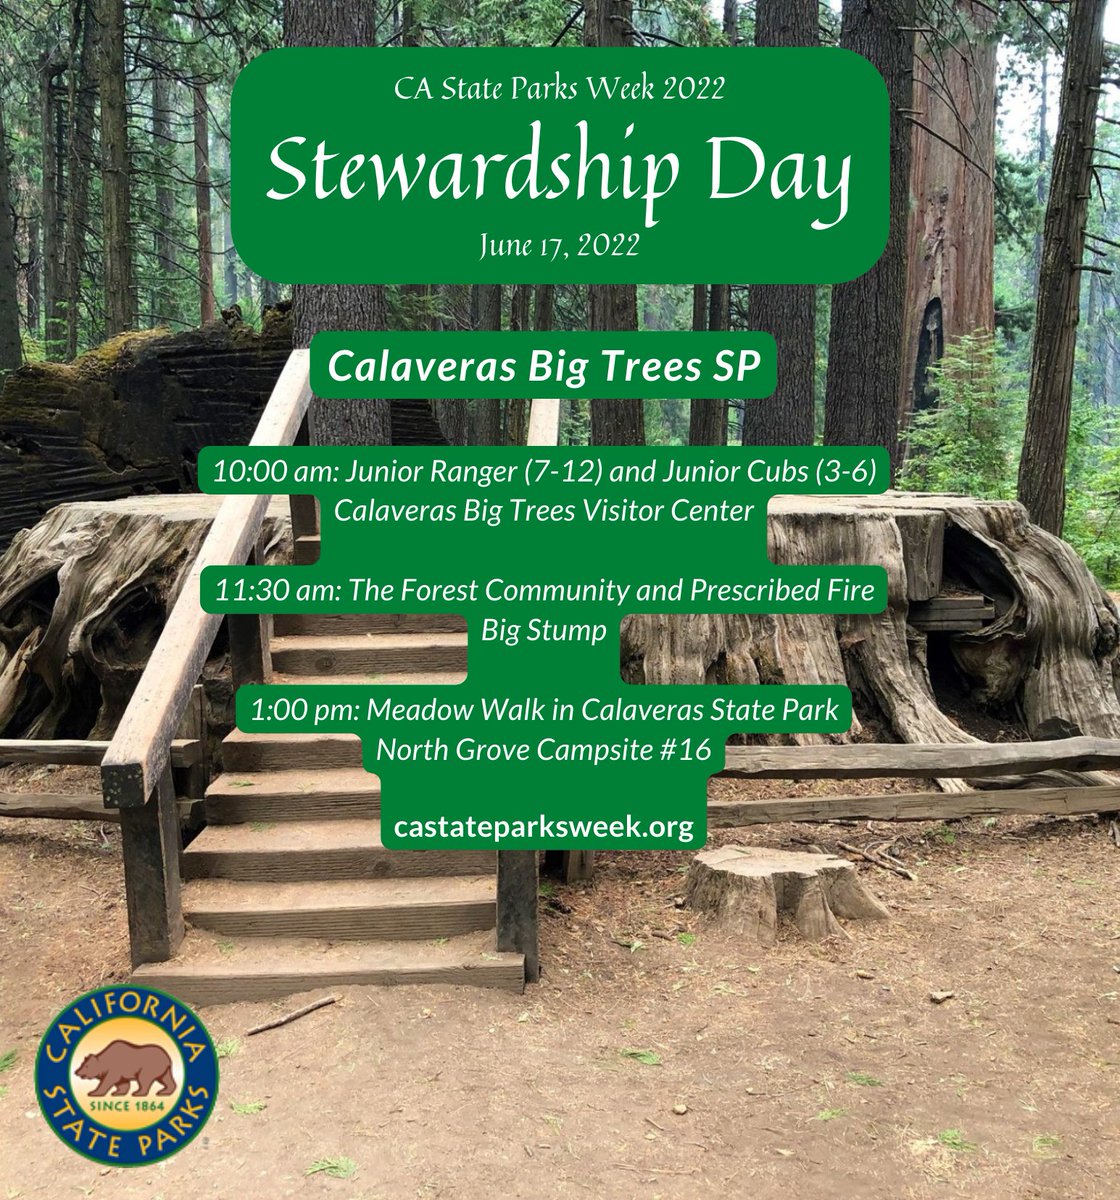 Tomorrow is #StewardshipDay as part of #CAStateParksWeek & there's some great events happening at Calaveras Big Trees SP! Discover the various land & habitat management activities that safeguard the wide diversity of plants & animals in the parks, & learn how to get involved!